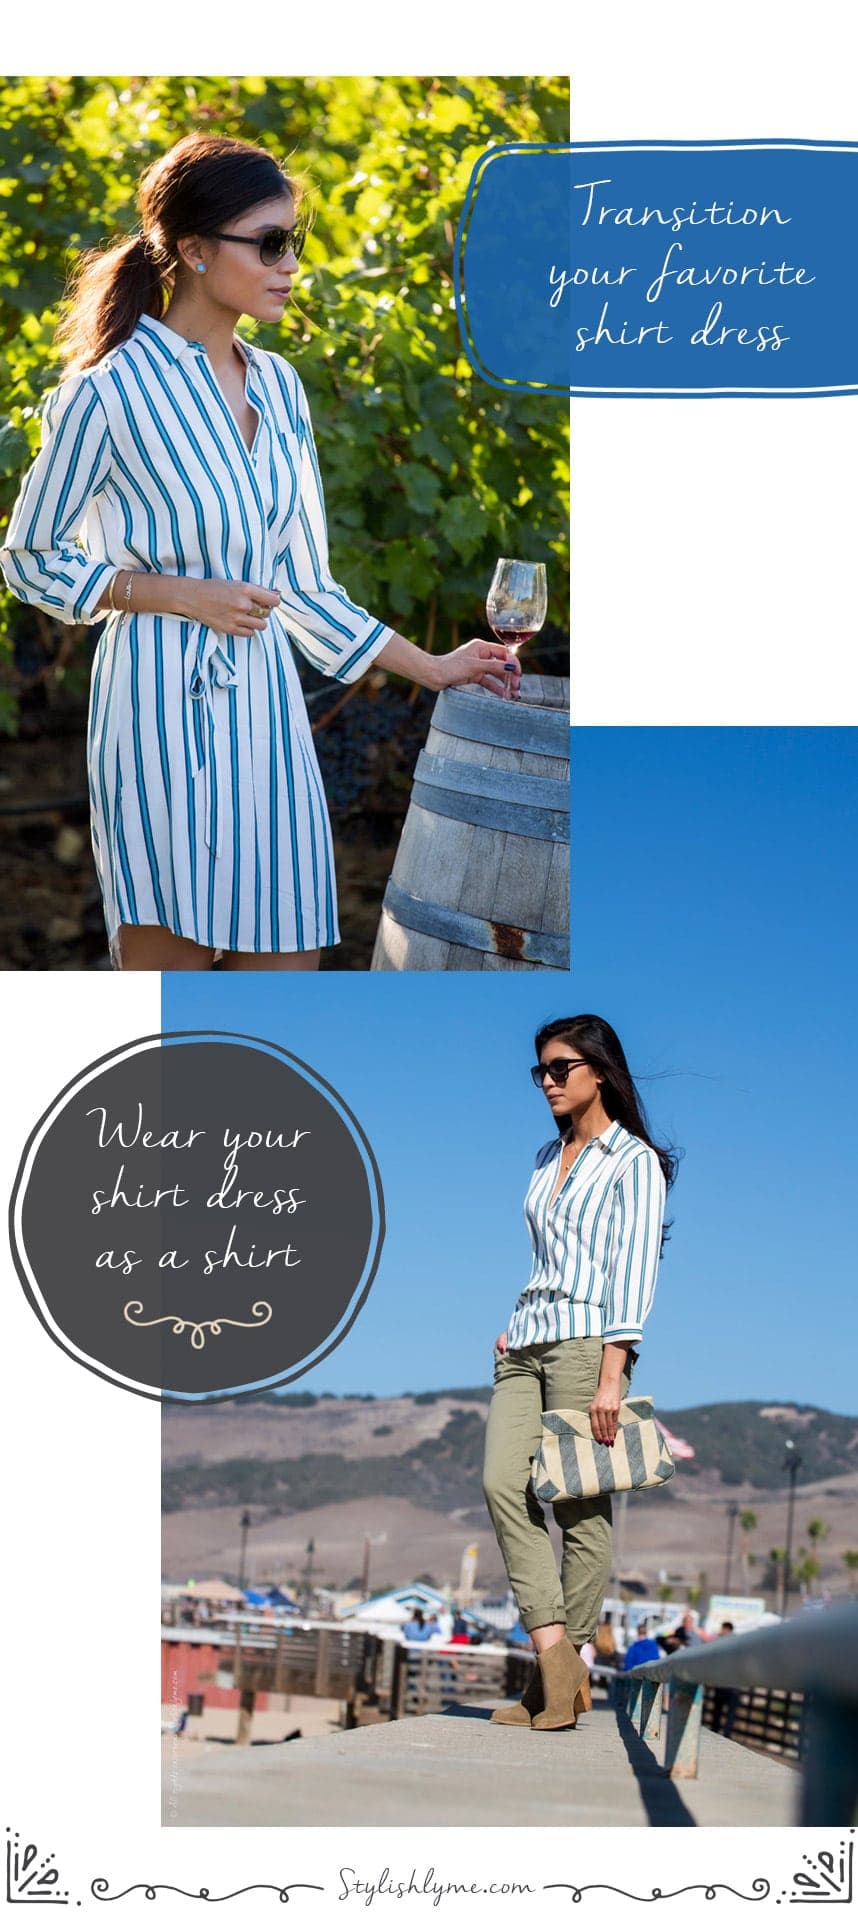 Wear your favorite shirt dress as a shirt - Visit Stylishlyme.com for more outfit inspiration and style tips